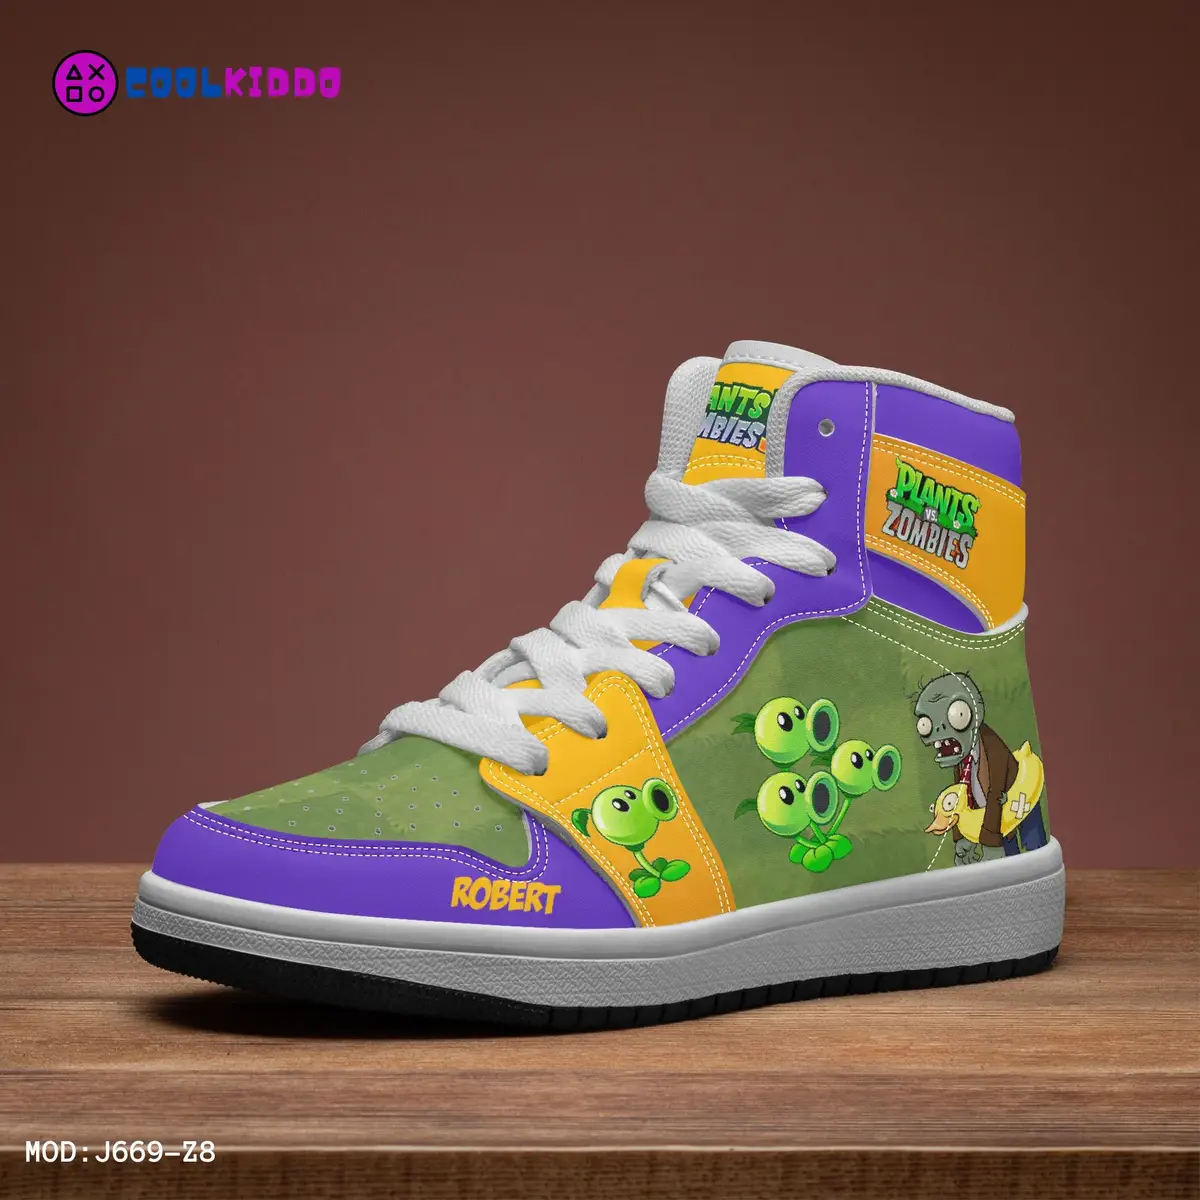 Personalized Plants vs Zombies Characters High-Top Leather Sneakers – Jordans Style Shoes Cool Kiddo 22